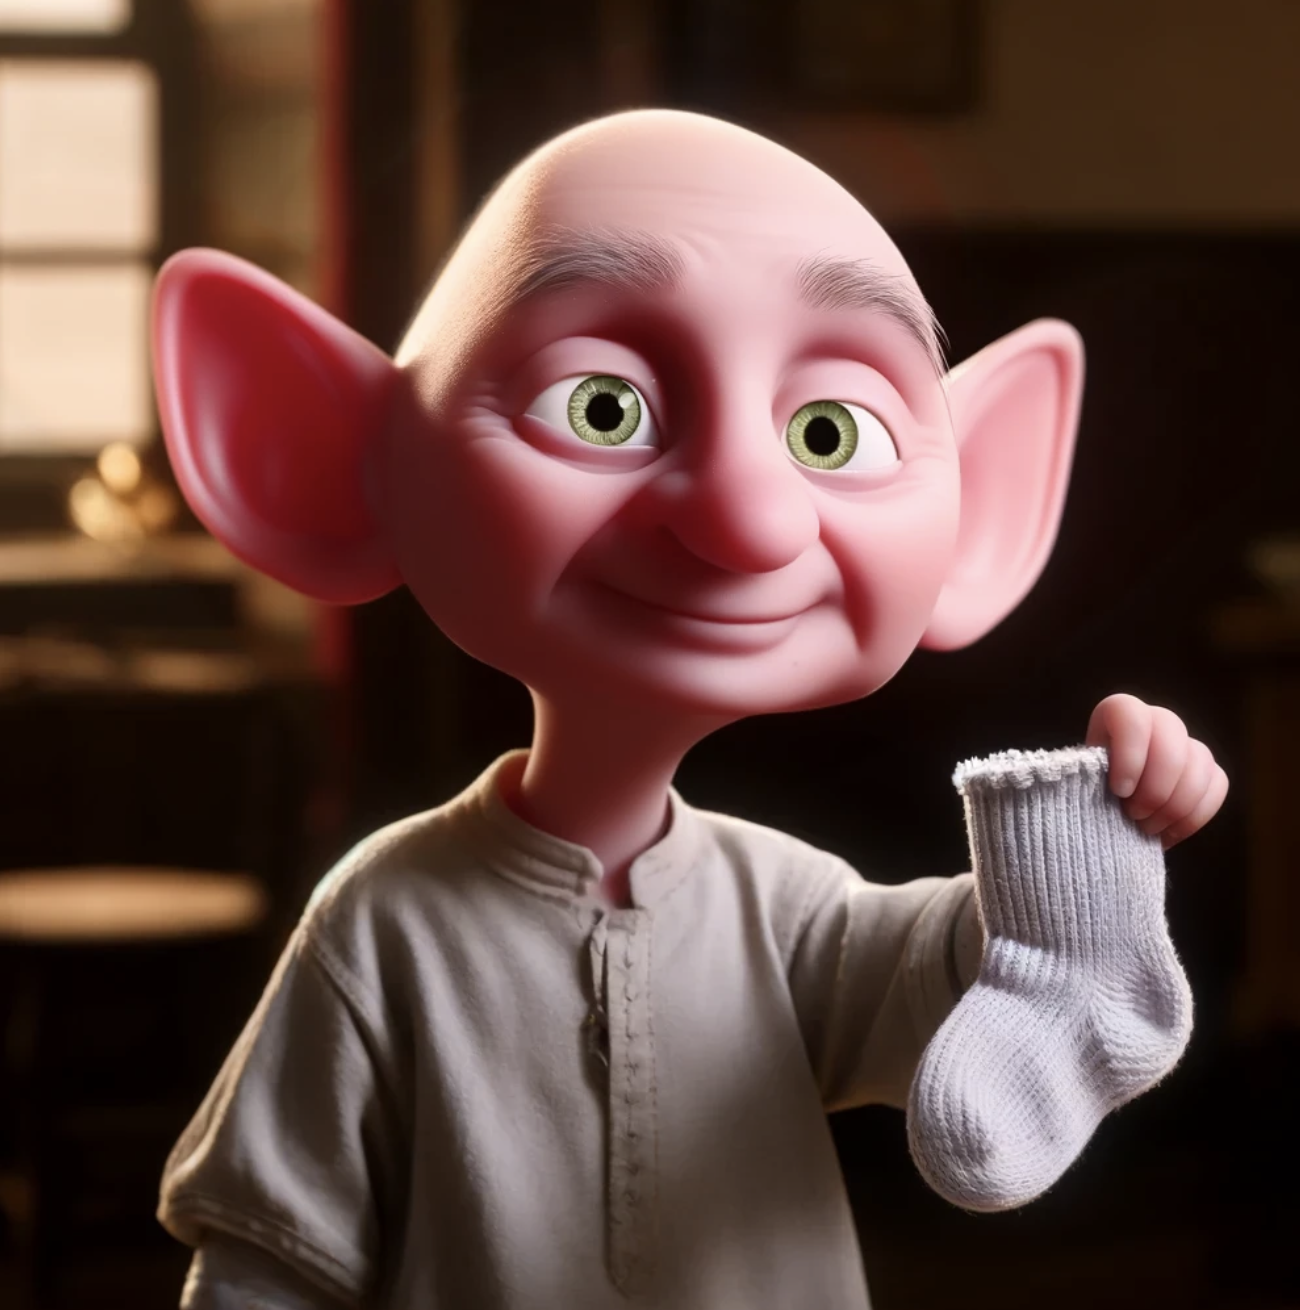 Dobby from Harry Potter holding up a sock, symbolizing his freedom